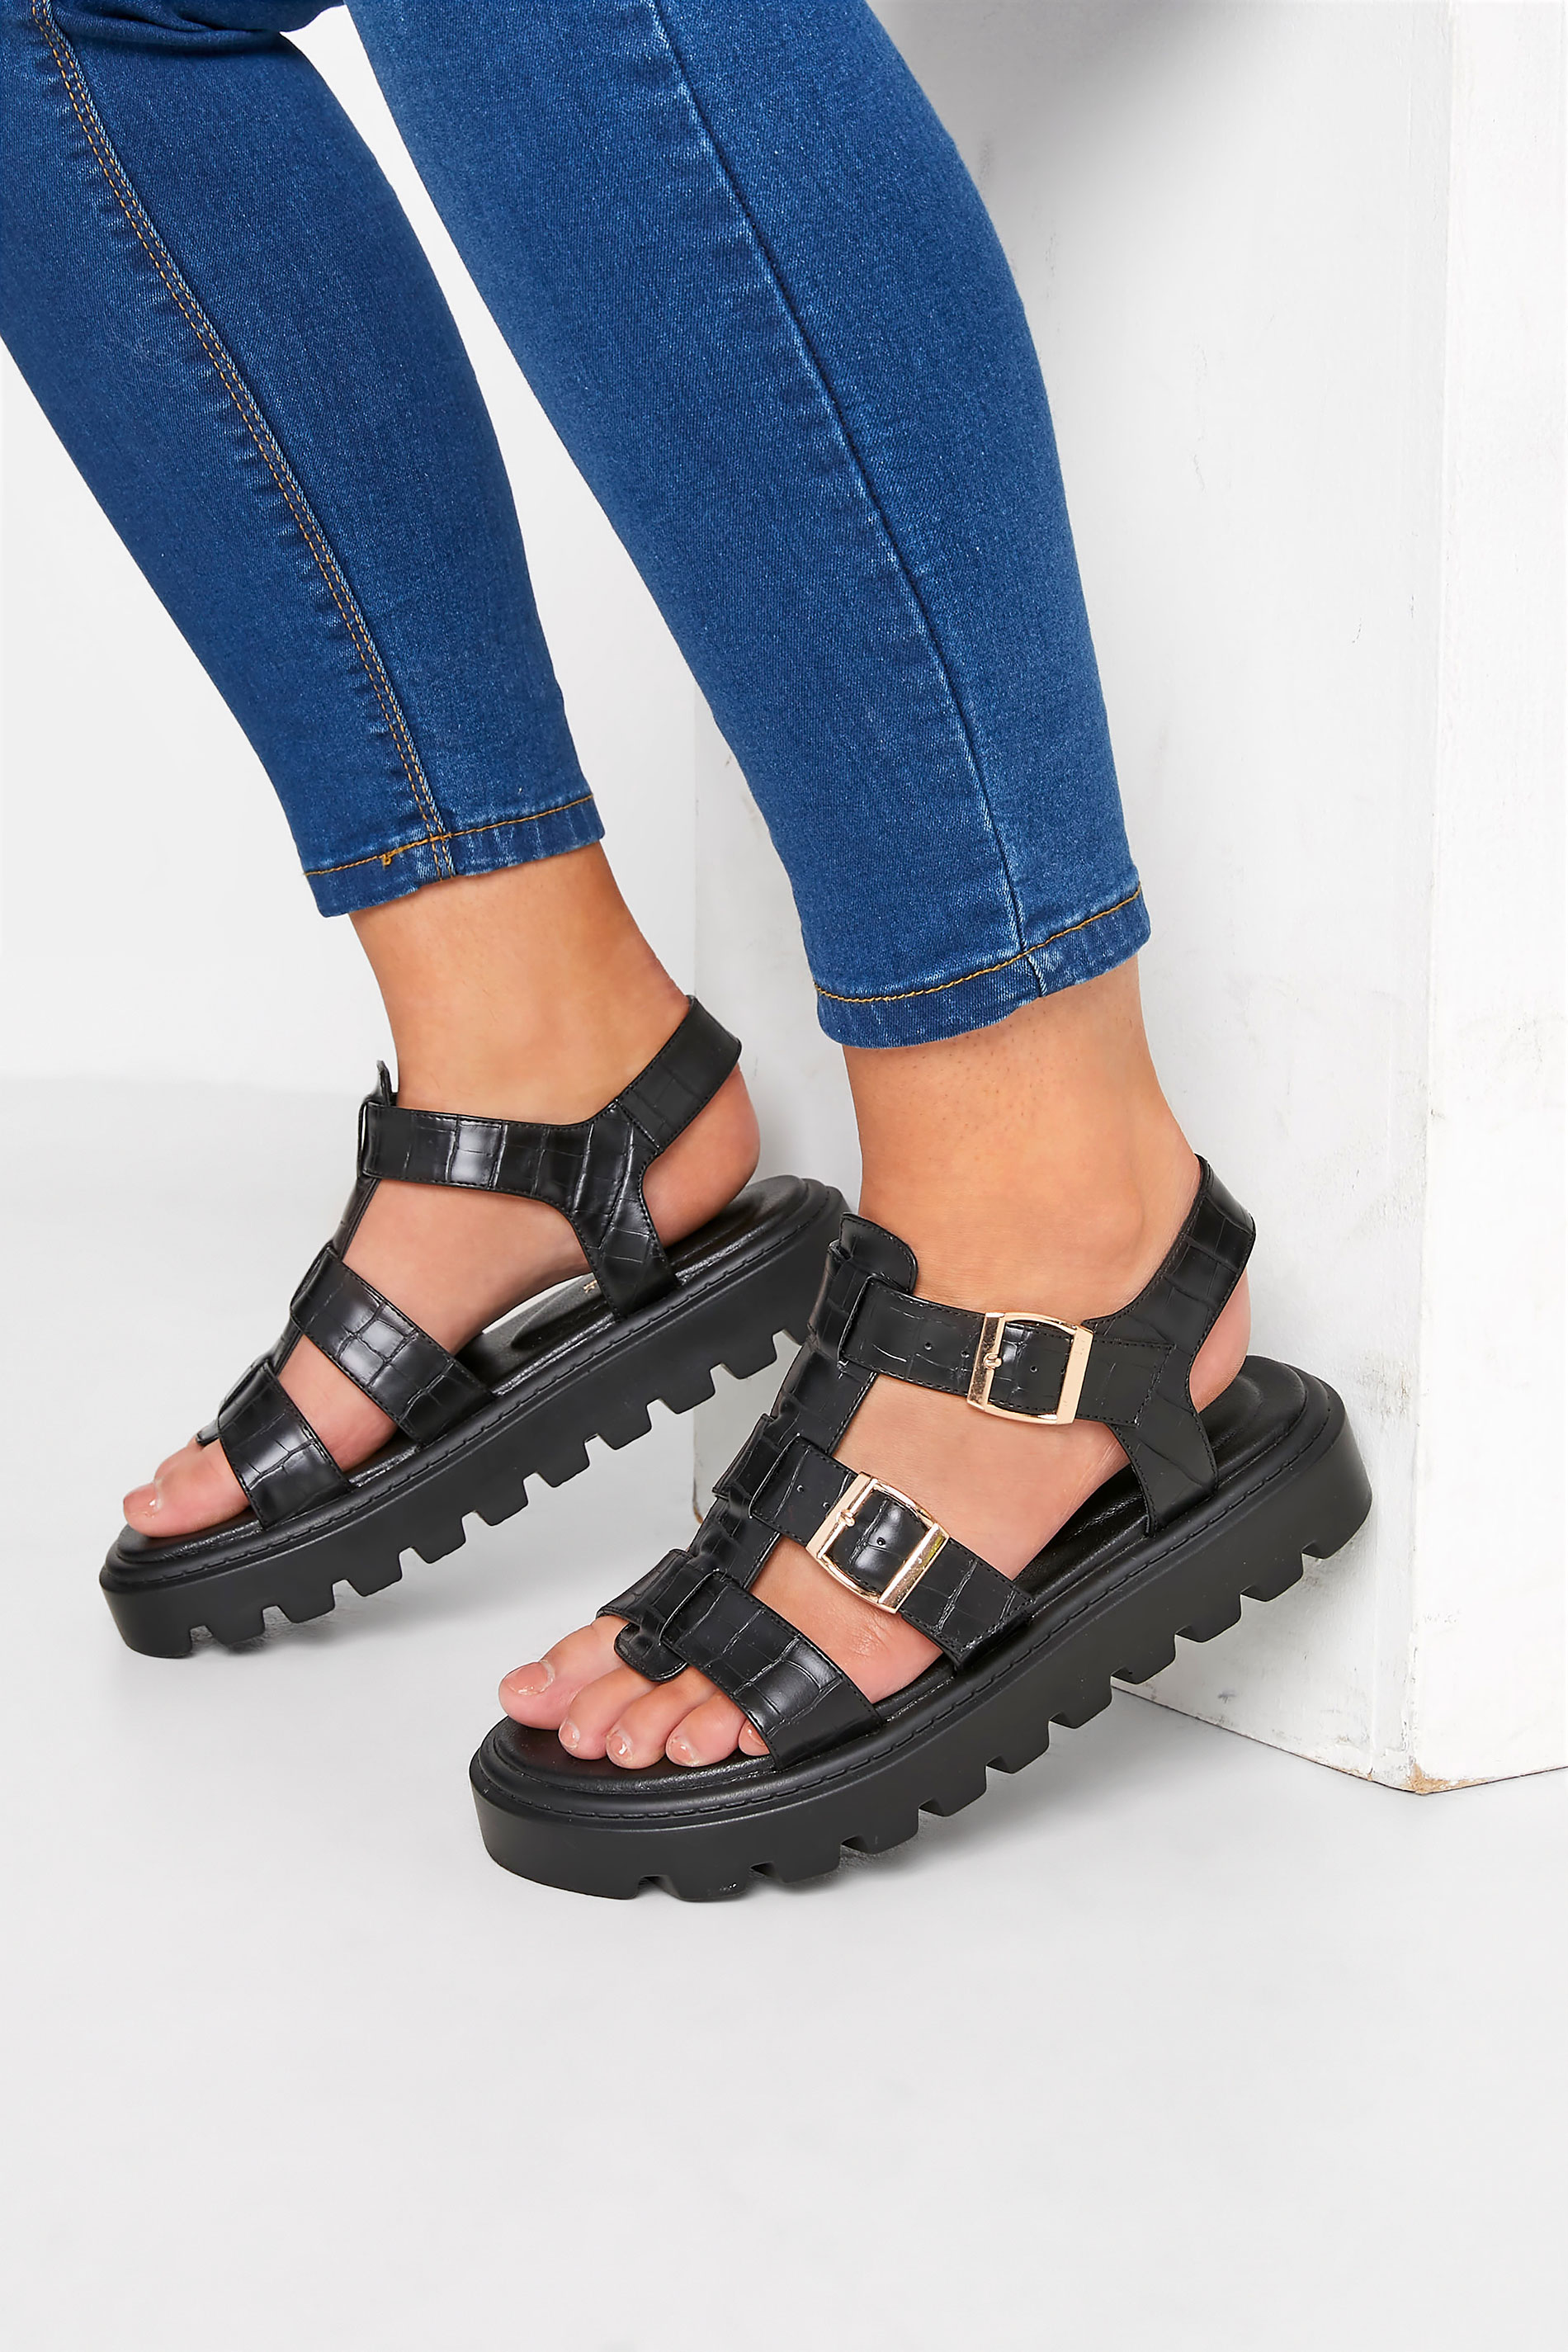 LIMITED COLLECTION Plus Size Black Croc Gladiator Sandals In Extra Wide Fit | Yours Clothing 1